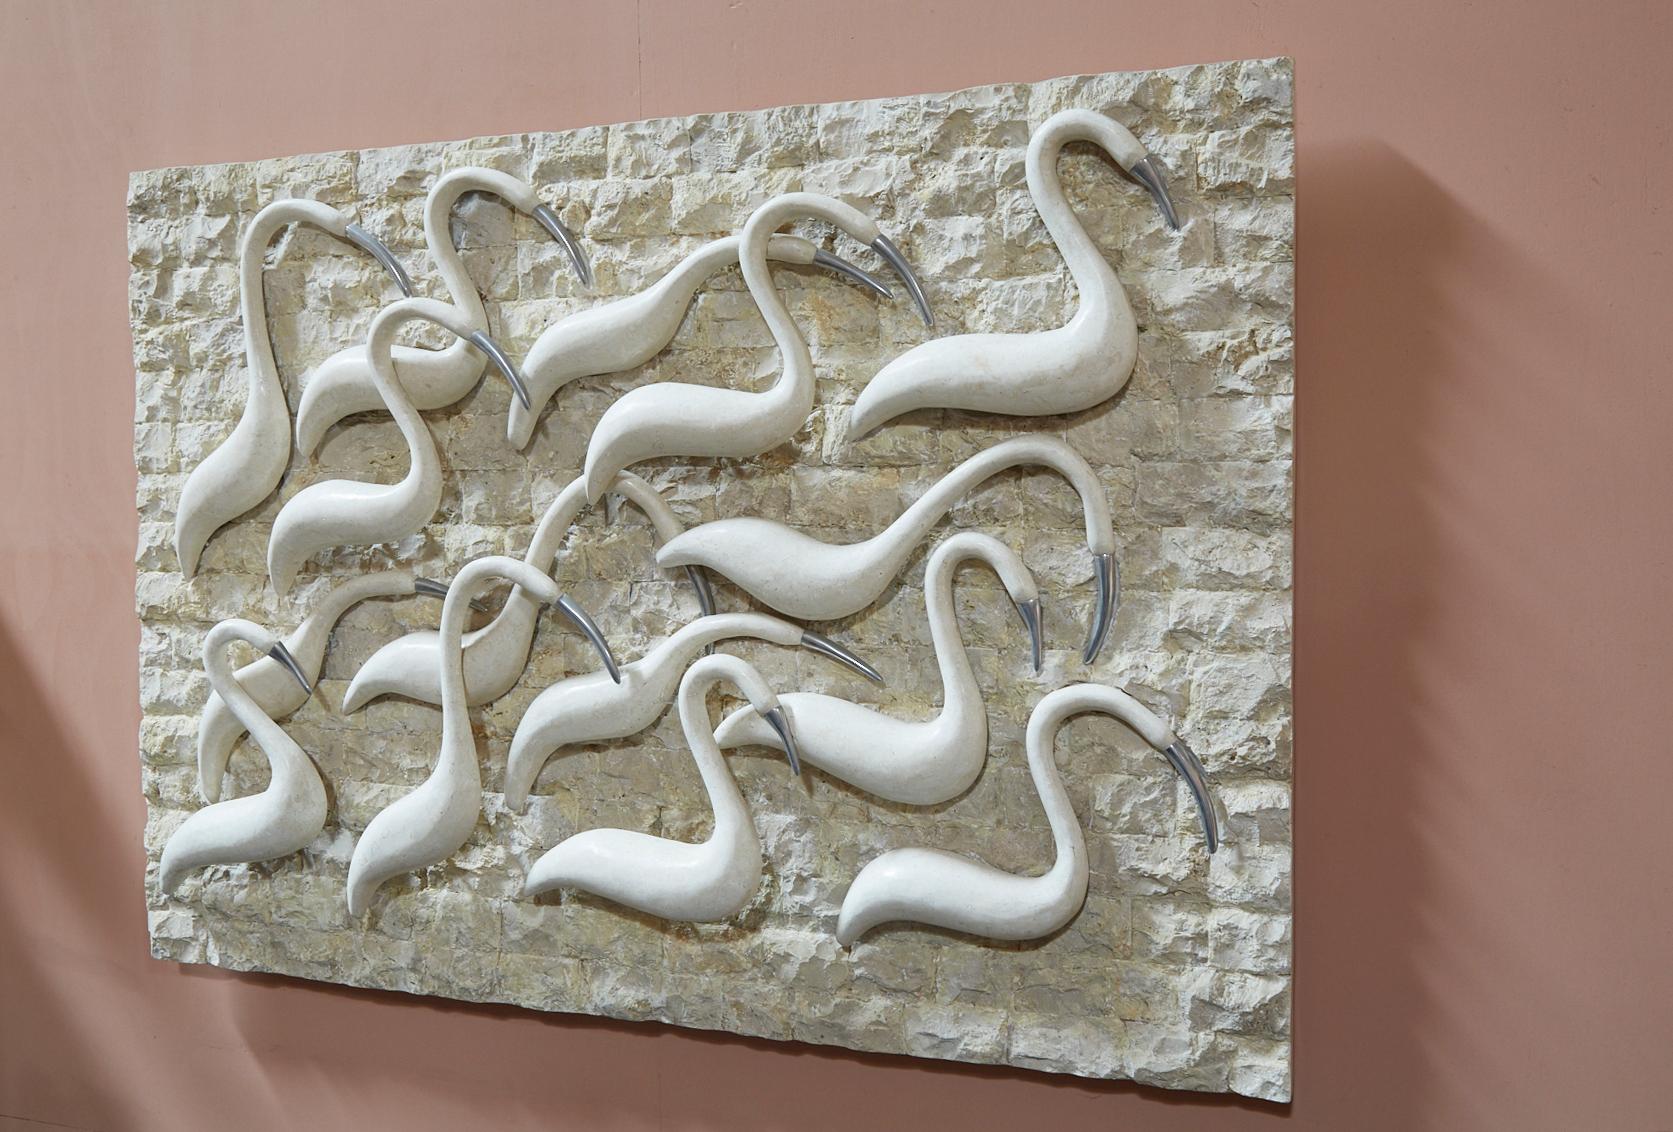 Fully inlaid with rough tessellated stone as a background, smooth stone birds with pewter beaks accentuate the foreground of this piece of sculptural wall art. All stone is handcut and inlaid onto a wooden and fiberglass body.

All furnishings are